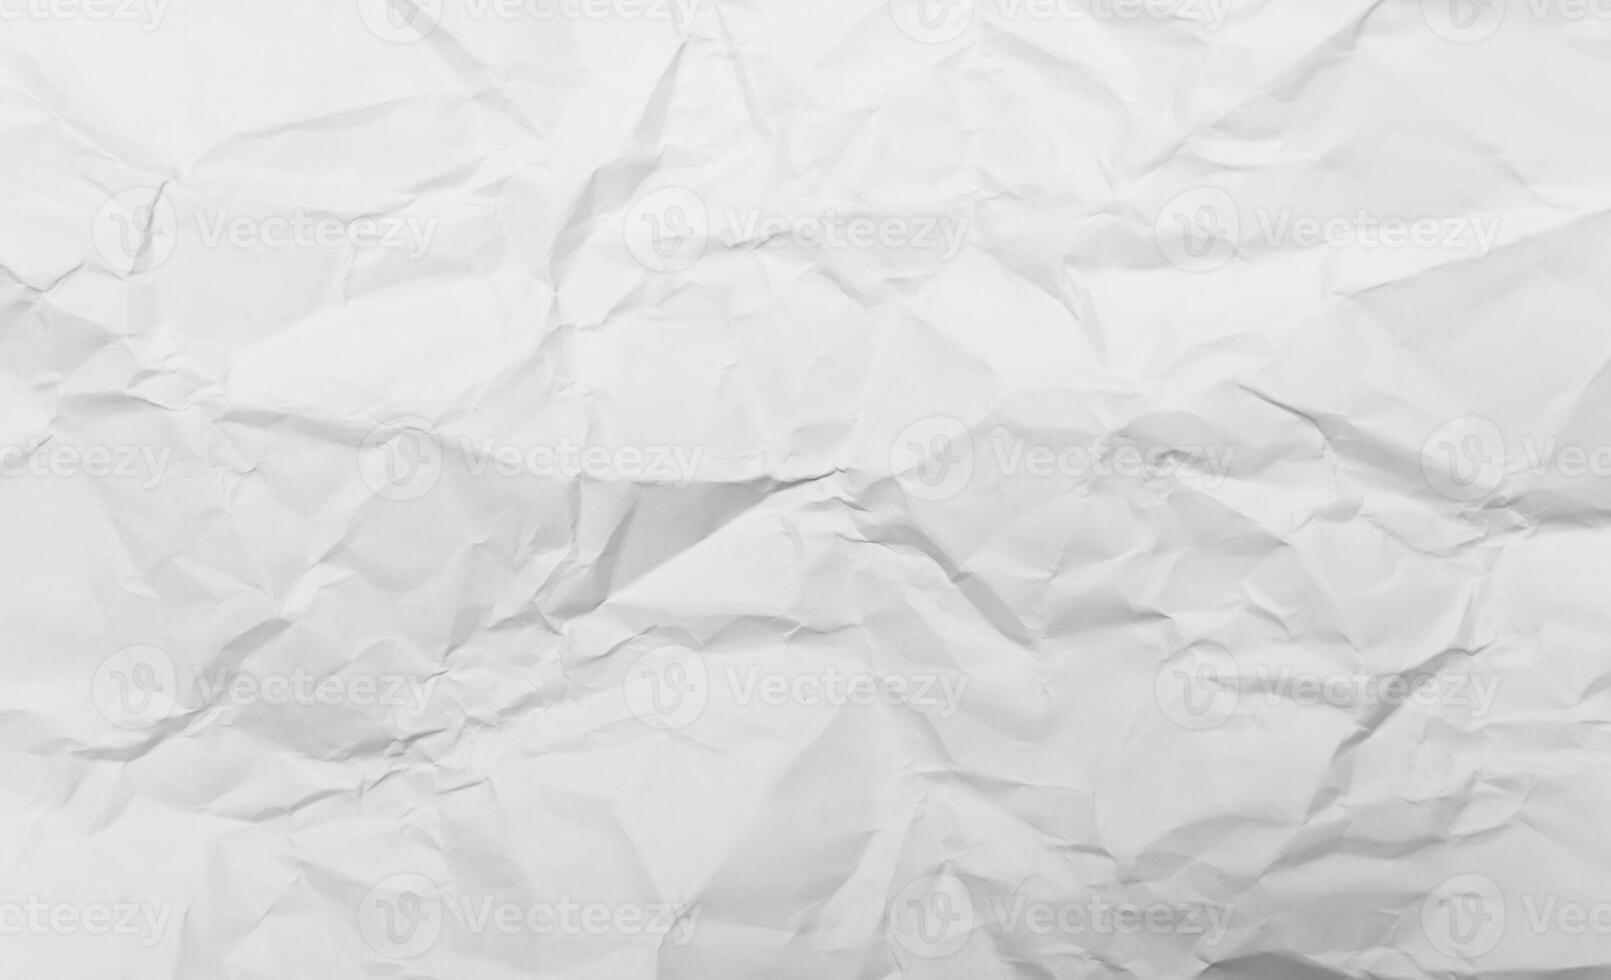 White Paper Texture background. Crumpled white paper abstract shape background with space paper recycle for text photo